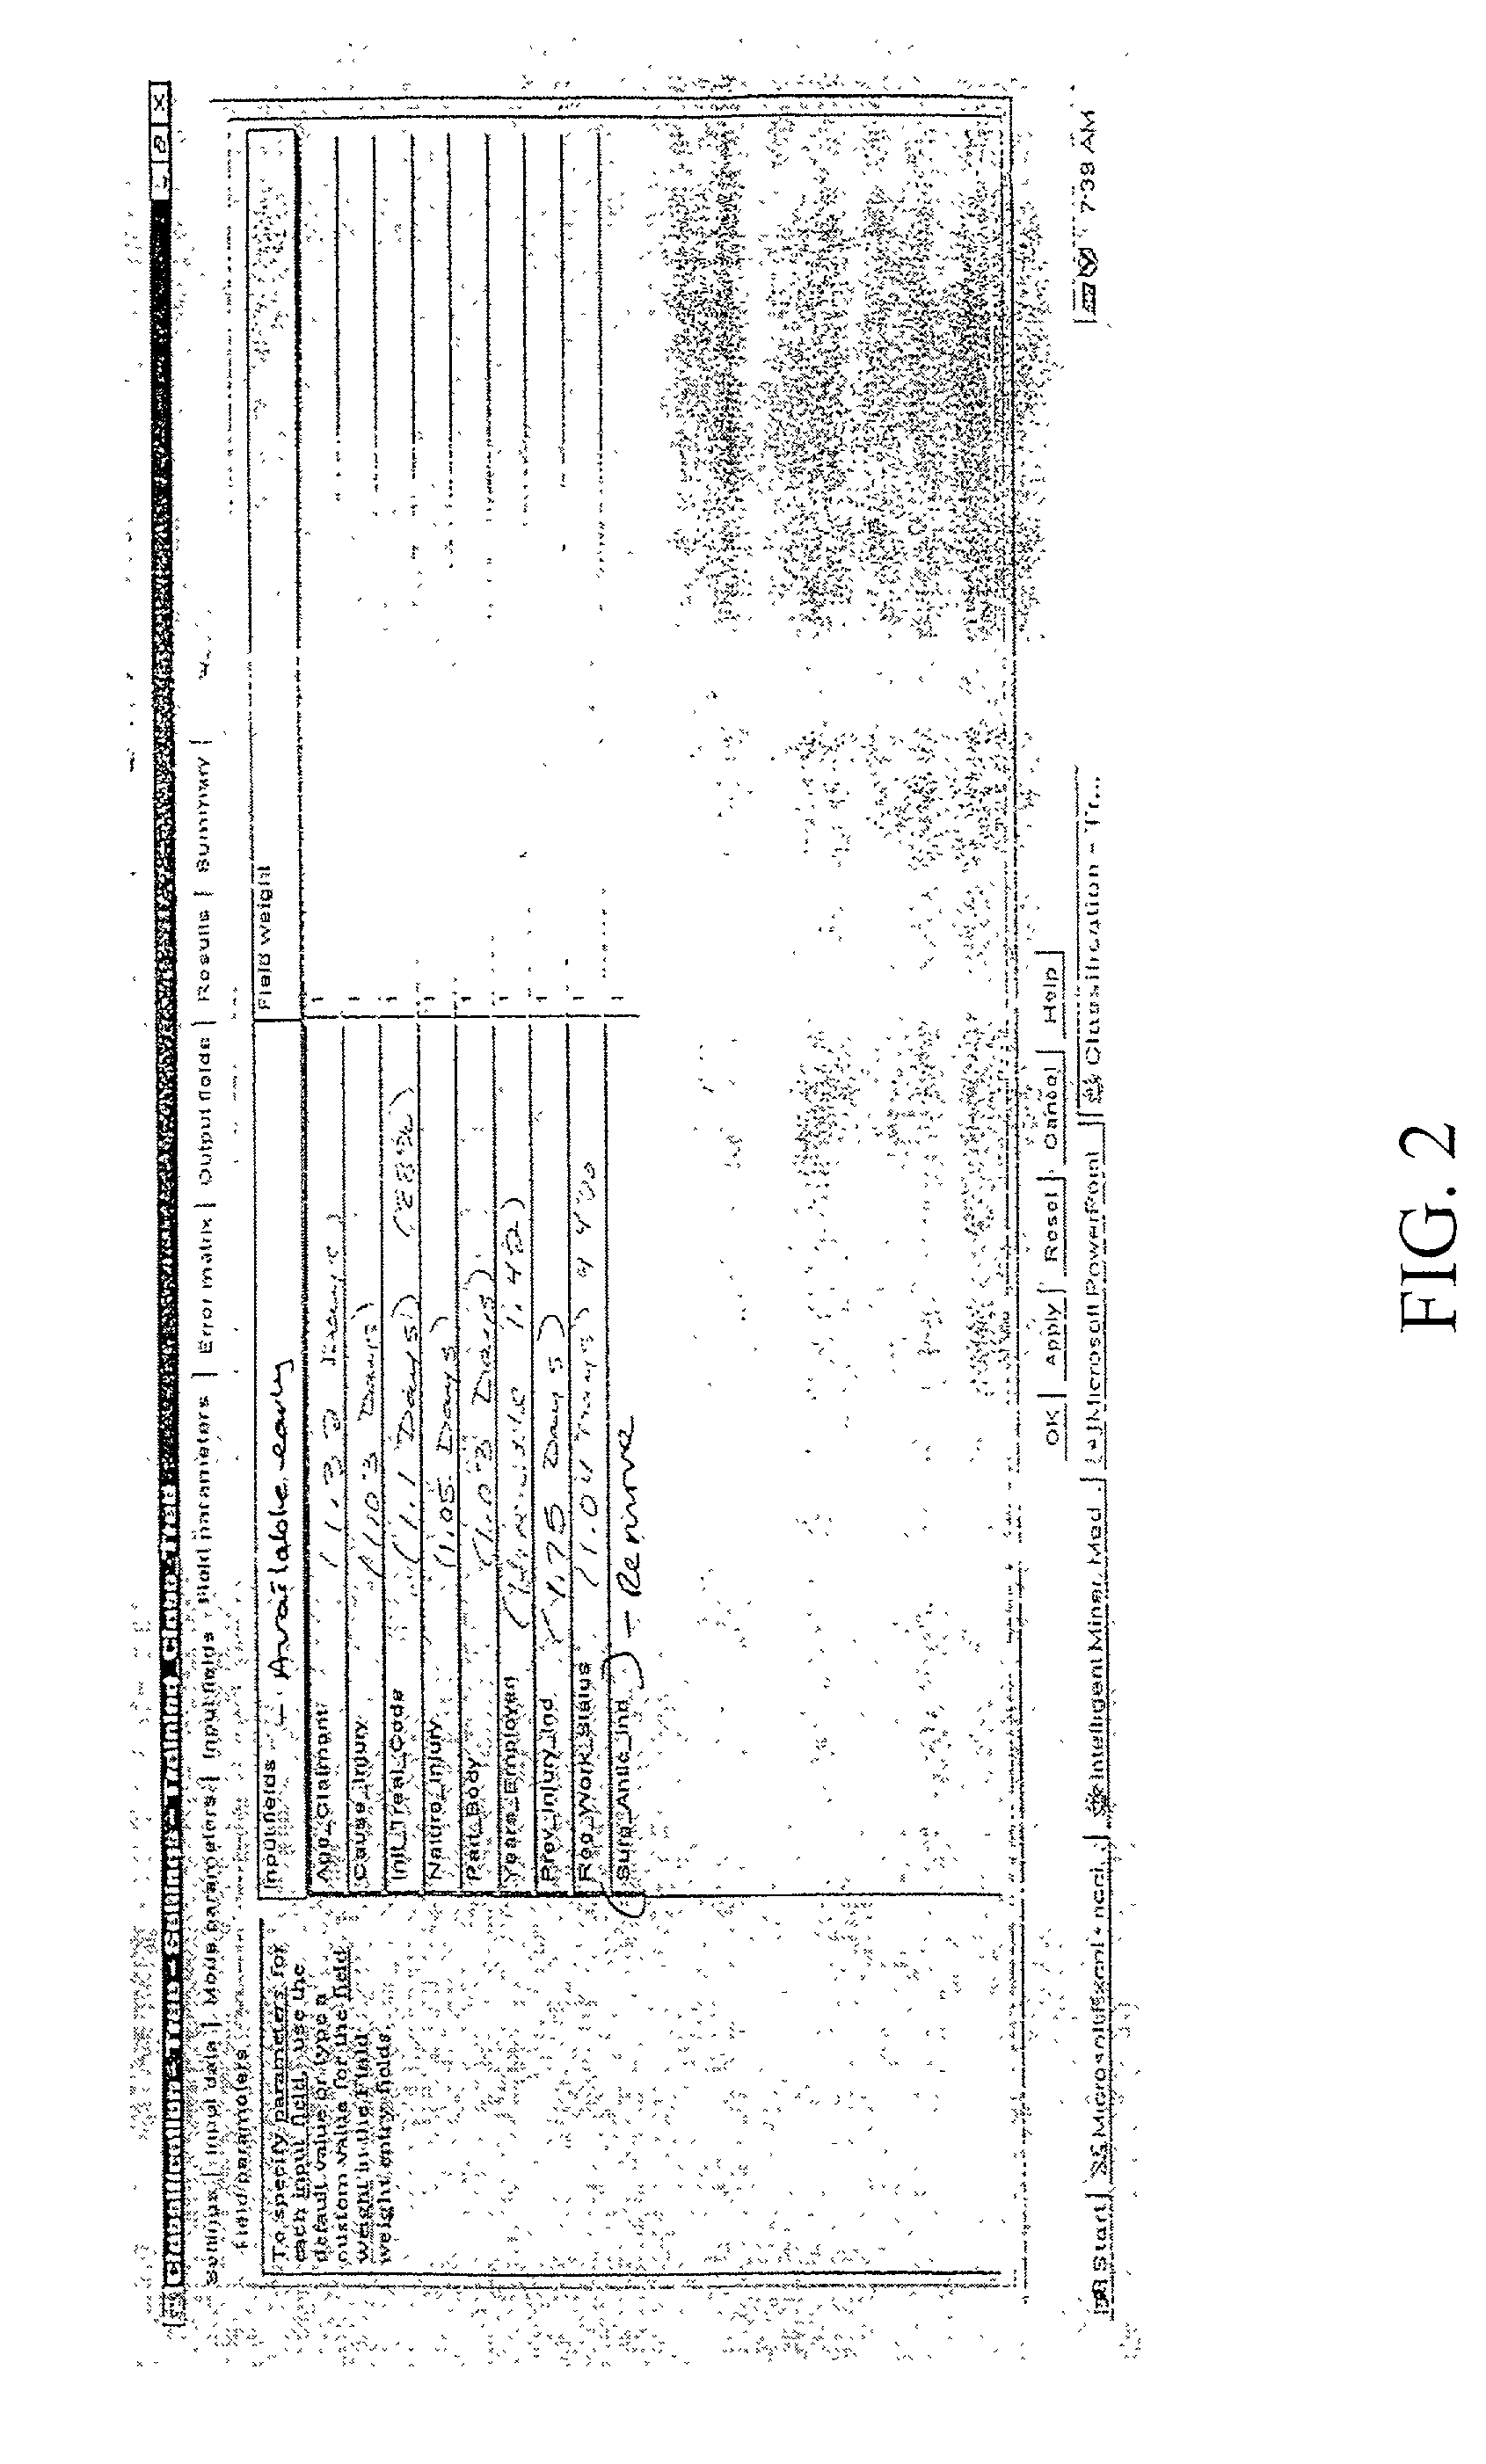 Method and system for enhanced medical triage